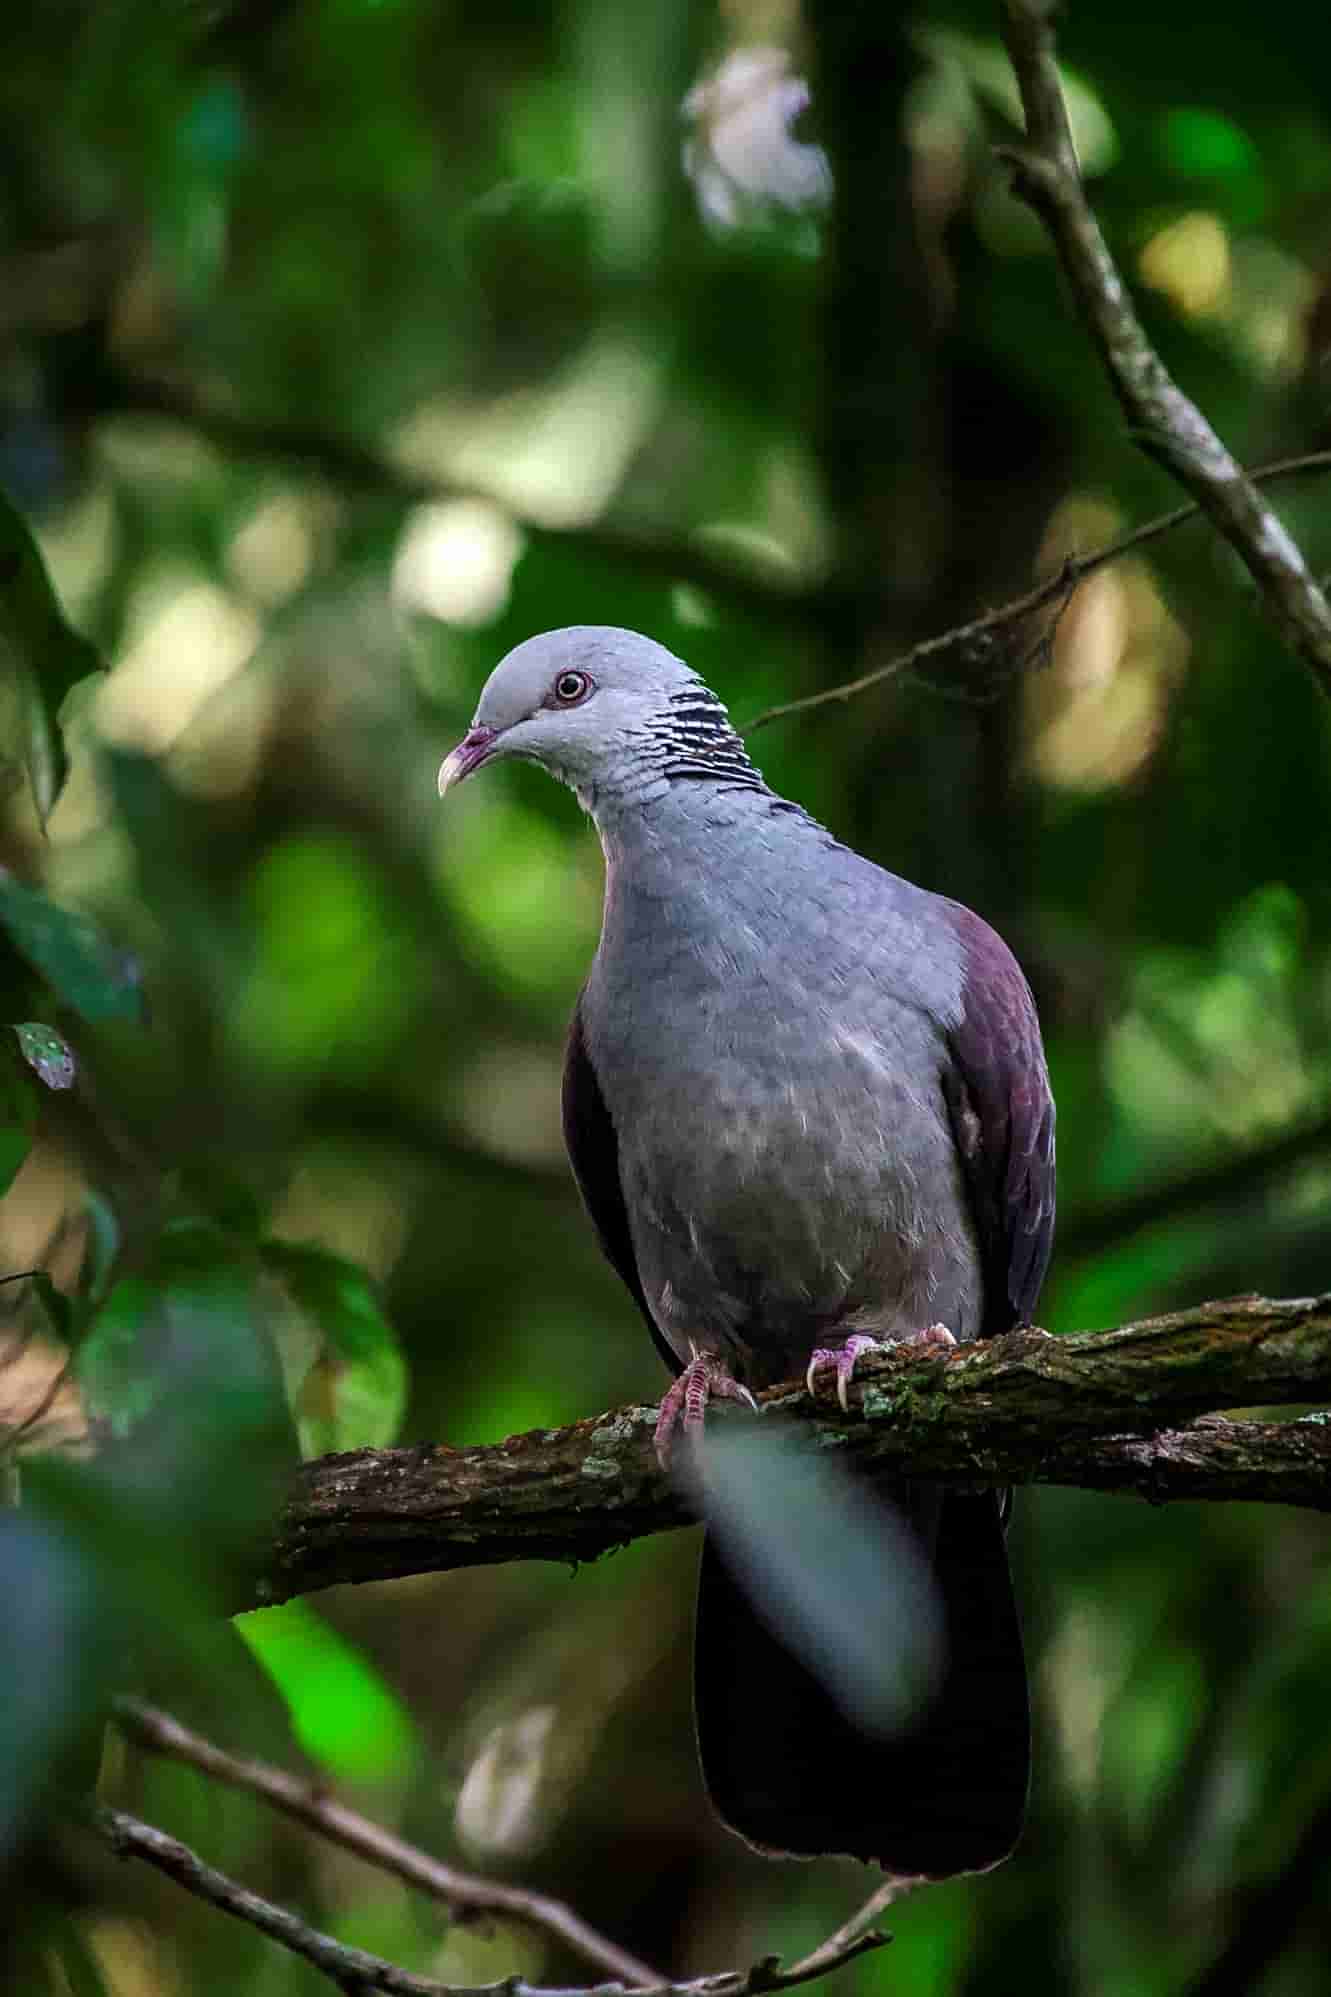 The-Pampadam-National-Park-has-many-species-of-rare-birds-fauna-and-flora.-It-is-one-of-the-Idukki-unexplored-places